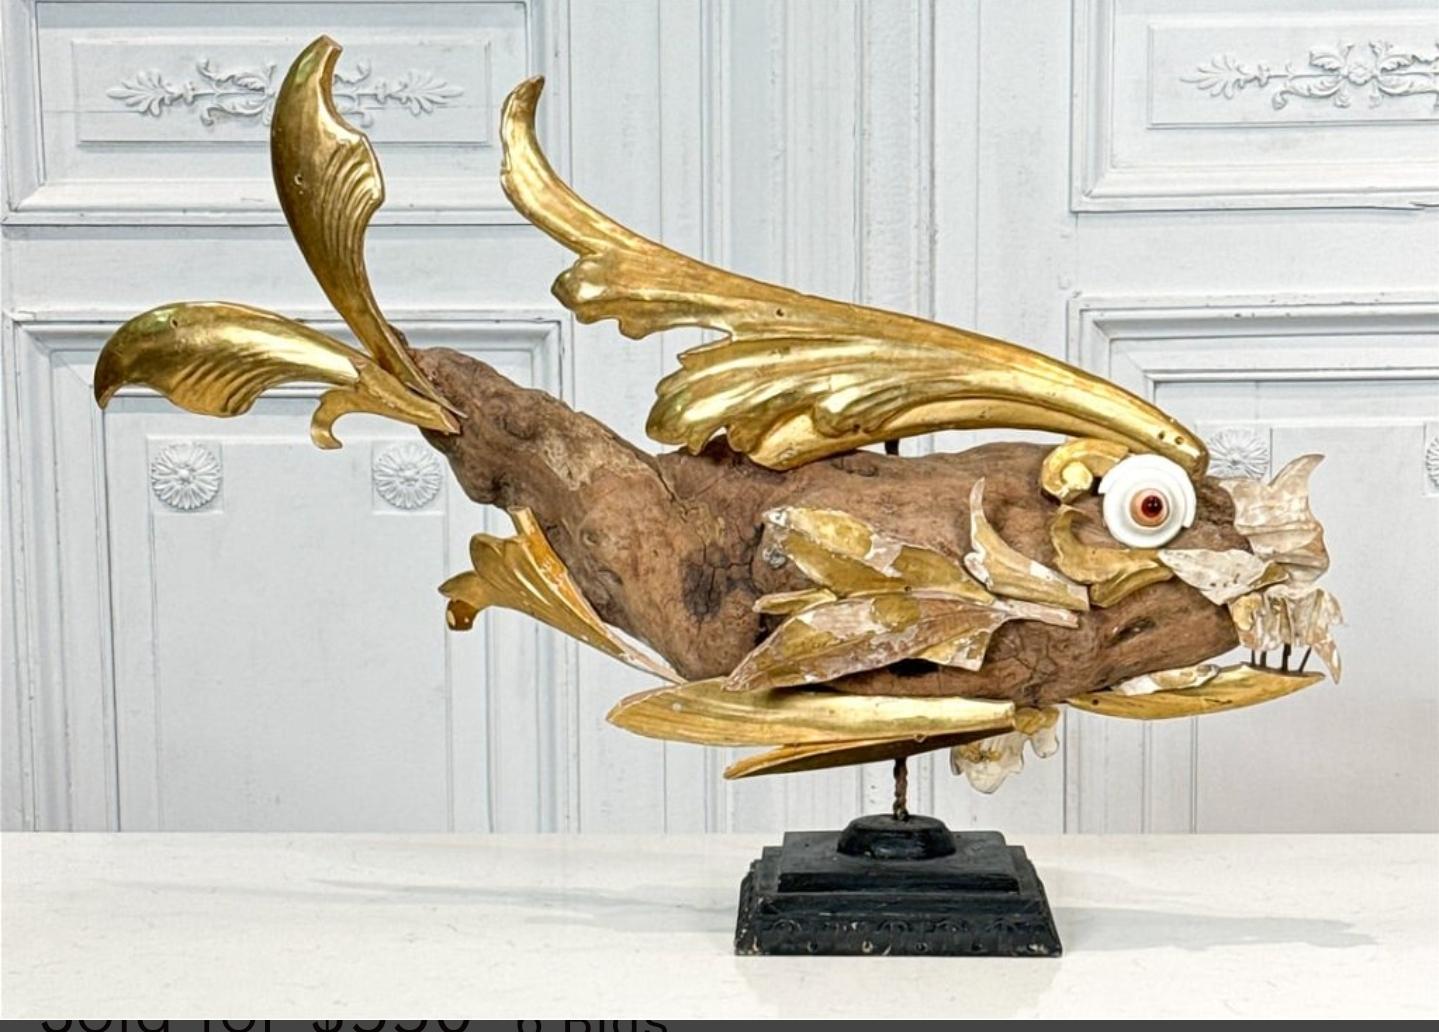 Hand-Carved Italian Folk Art Fish Sculpture from 18th/19th Century Fragments Found Objects For Sale